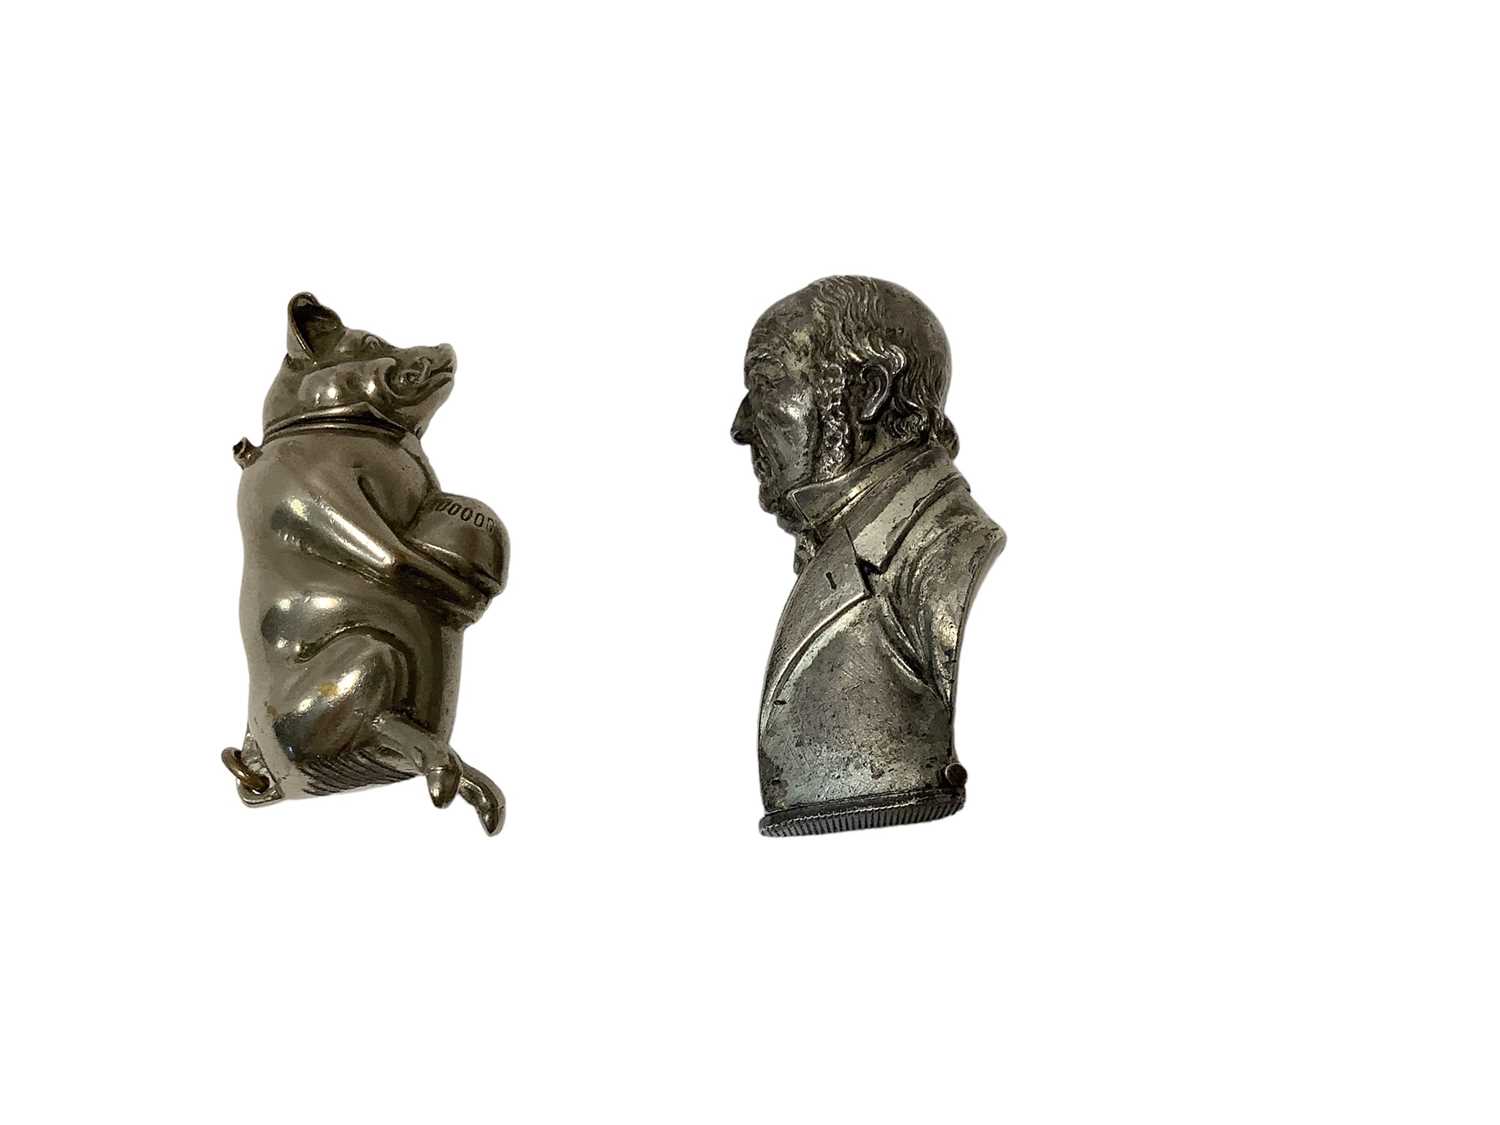 Lot 7 - Victorian plated novelty Vesta case in the form of a bust of William Gladstone 55mm high and another of a pig engraved 'Little'Wadhurst Farm' 5cm (2)